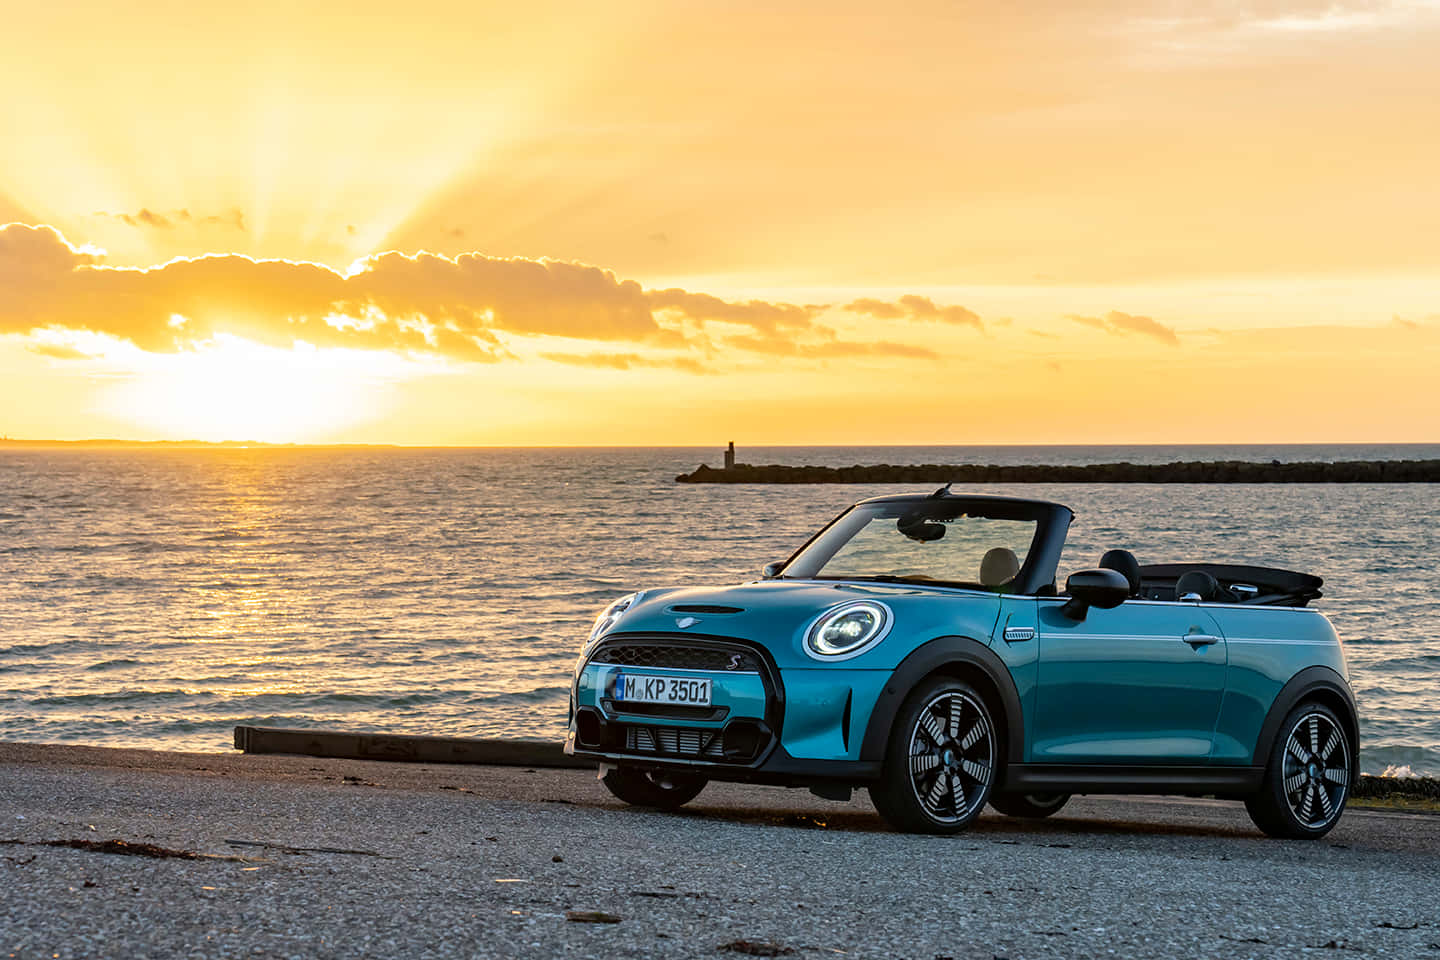 Captivating Mini Cooper S Convertible in Action Wallpaper